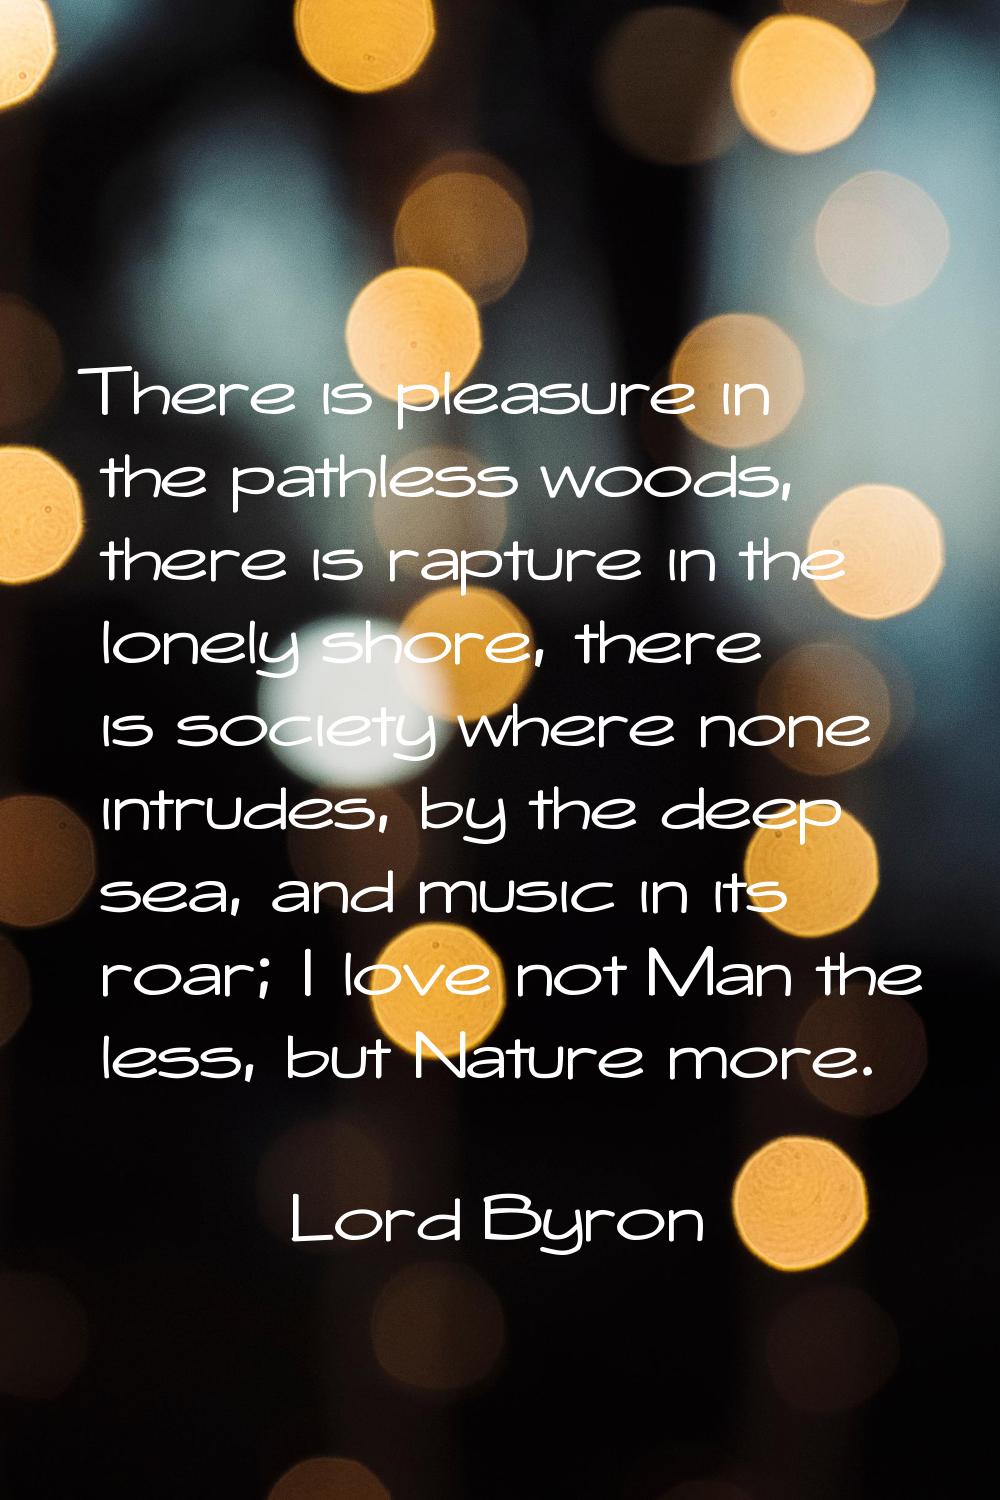 There is pleasure in the pathless woods, there is rapture in the lonely shore, there is society whe